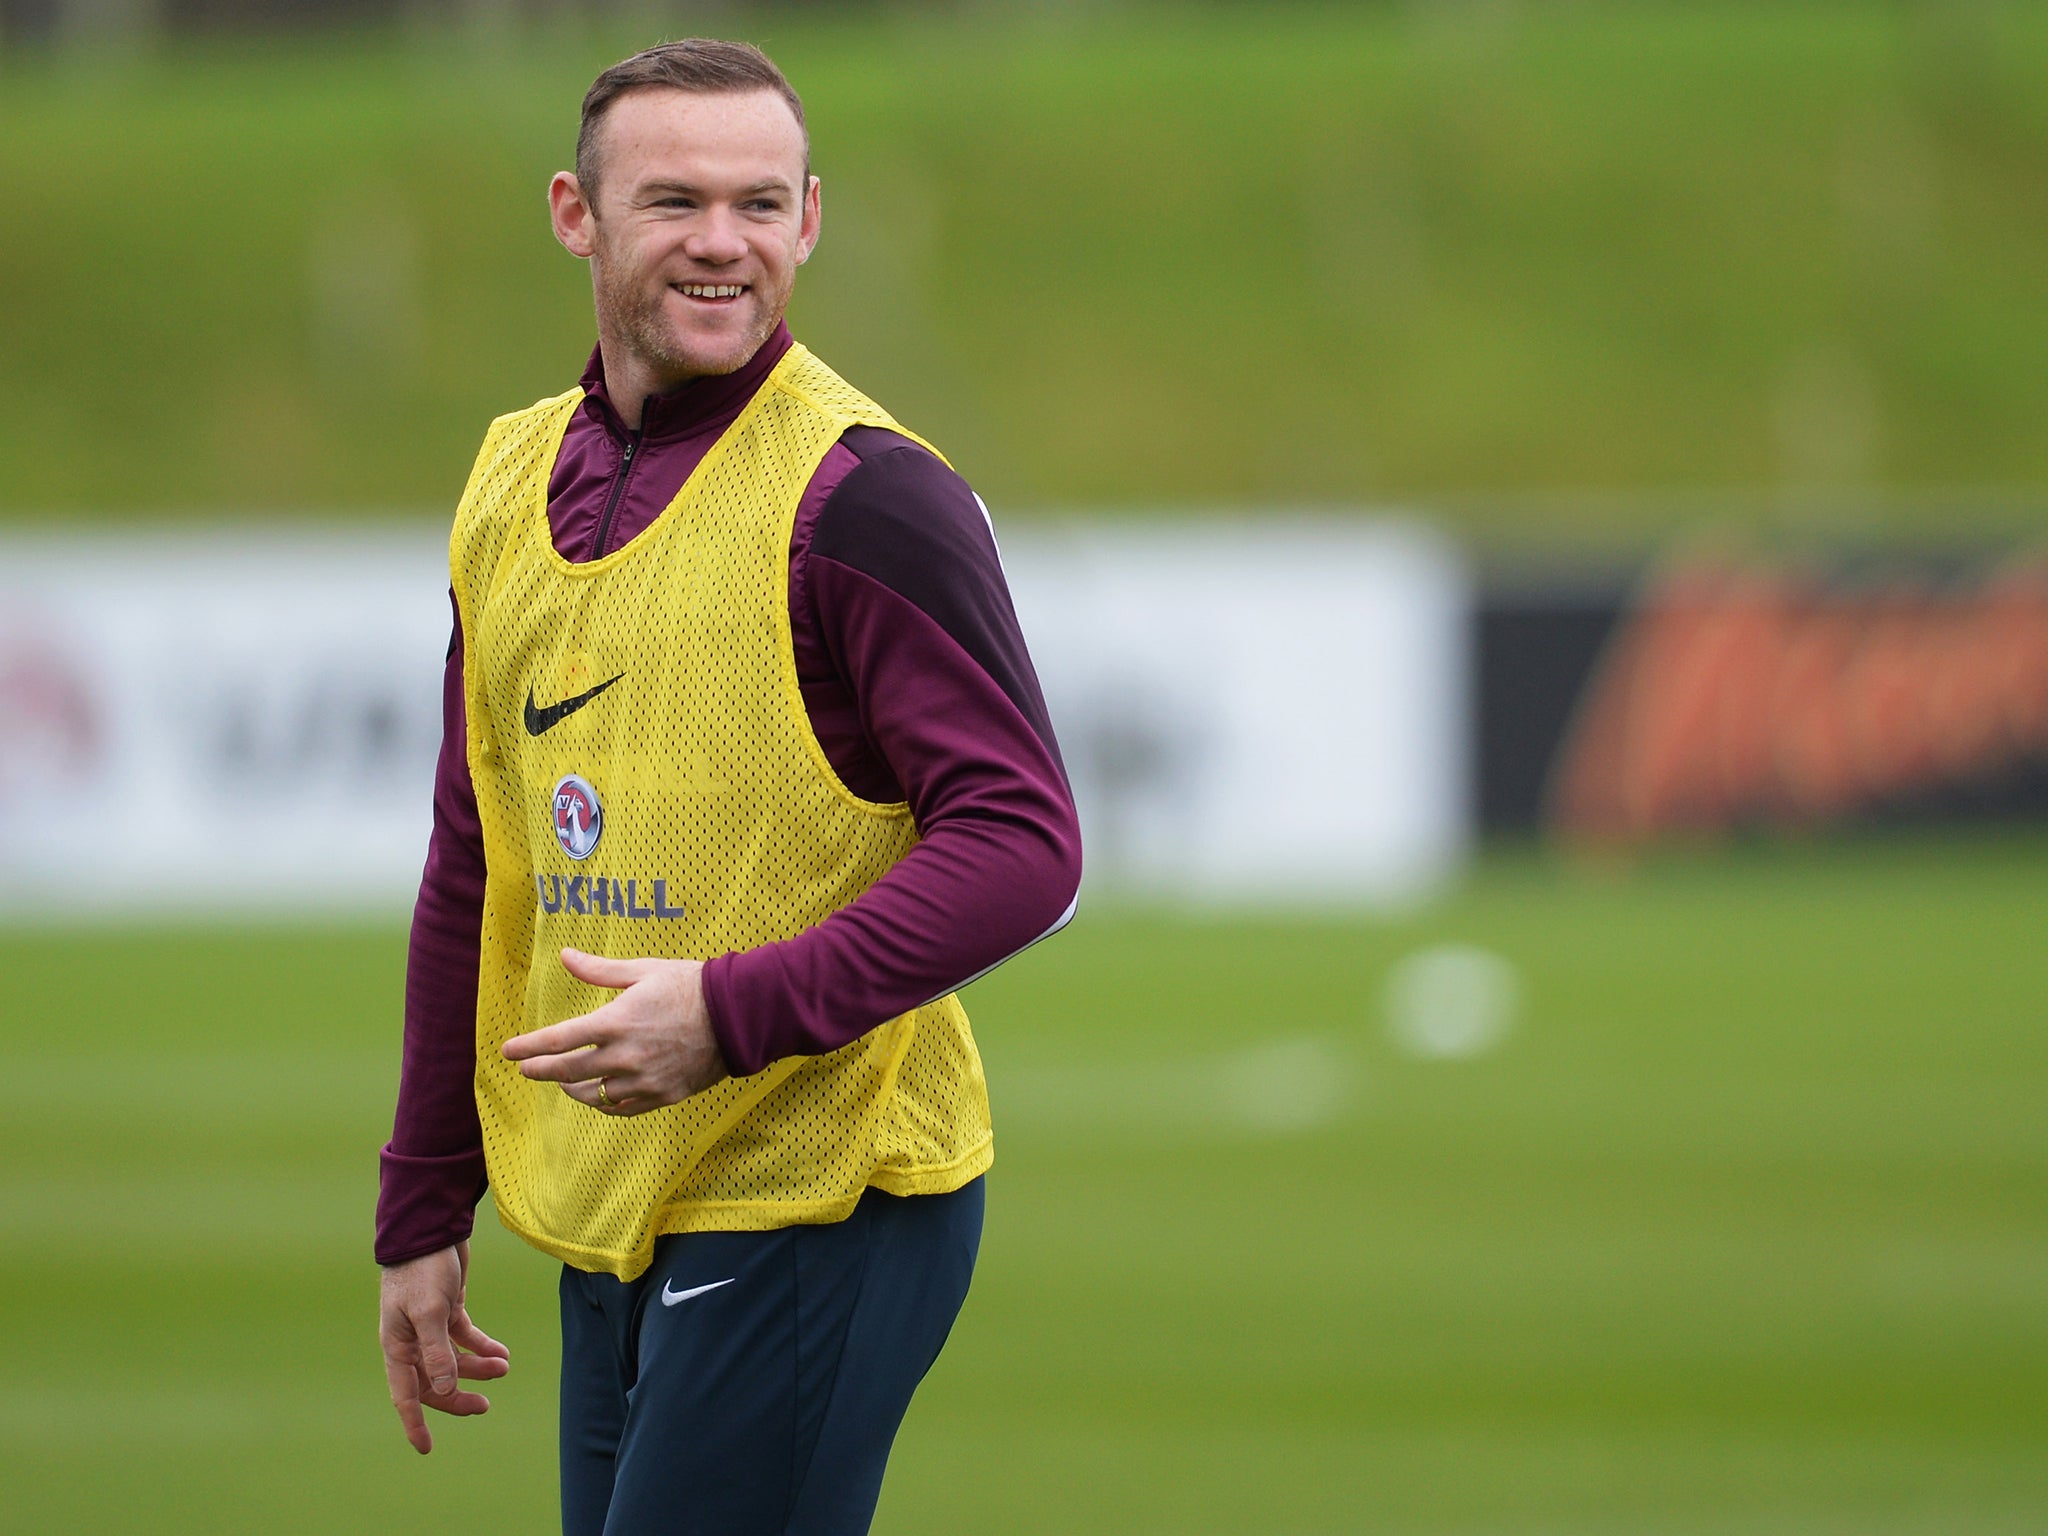 Wayne Rooney looks on during an England training session, ahead of the UEFA European Championship qualifier match against Slovenia, at St Georges Park on November 14, 2014 in Burton-upon-Trent, England.